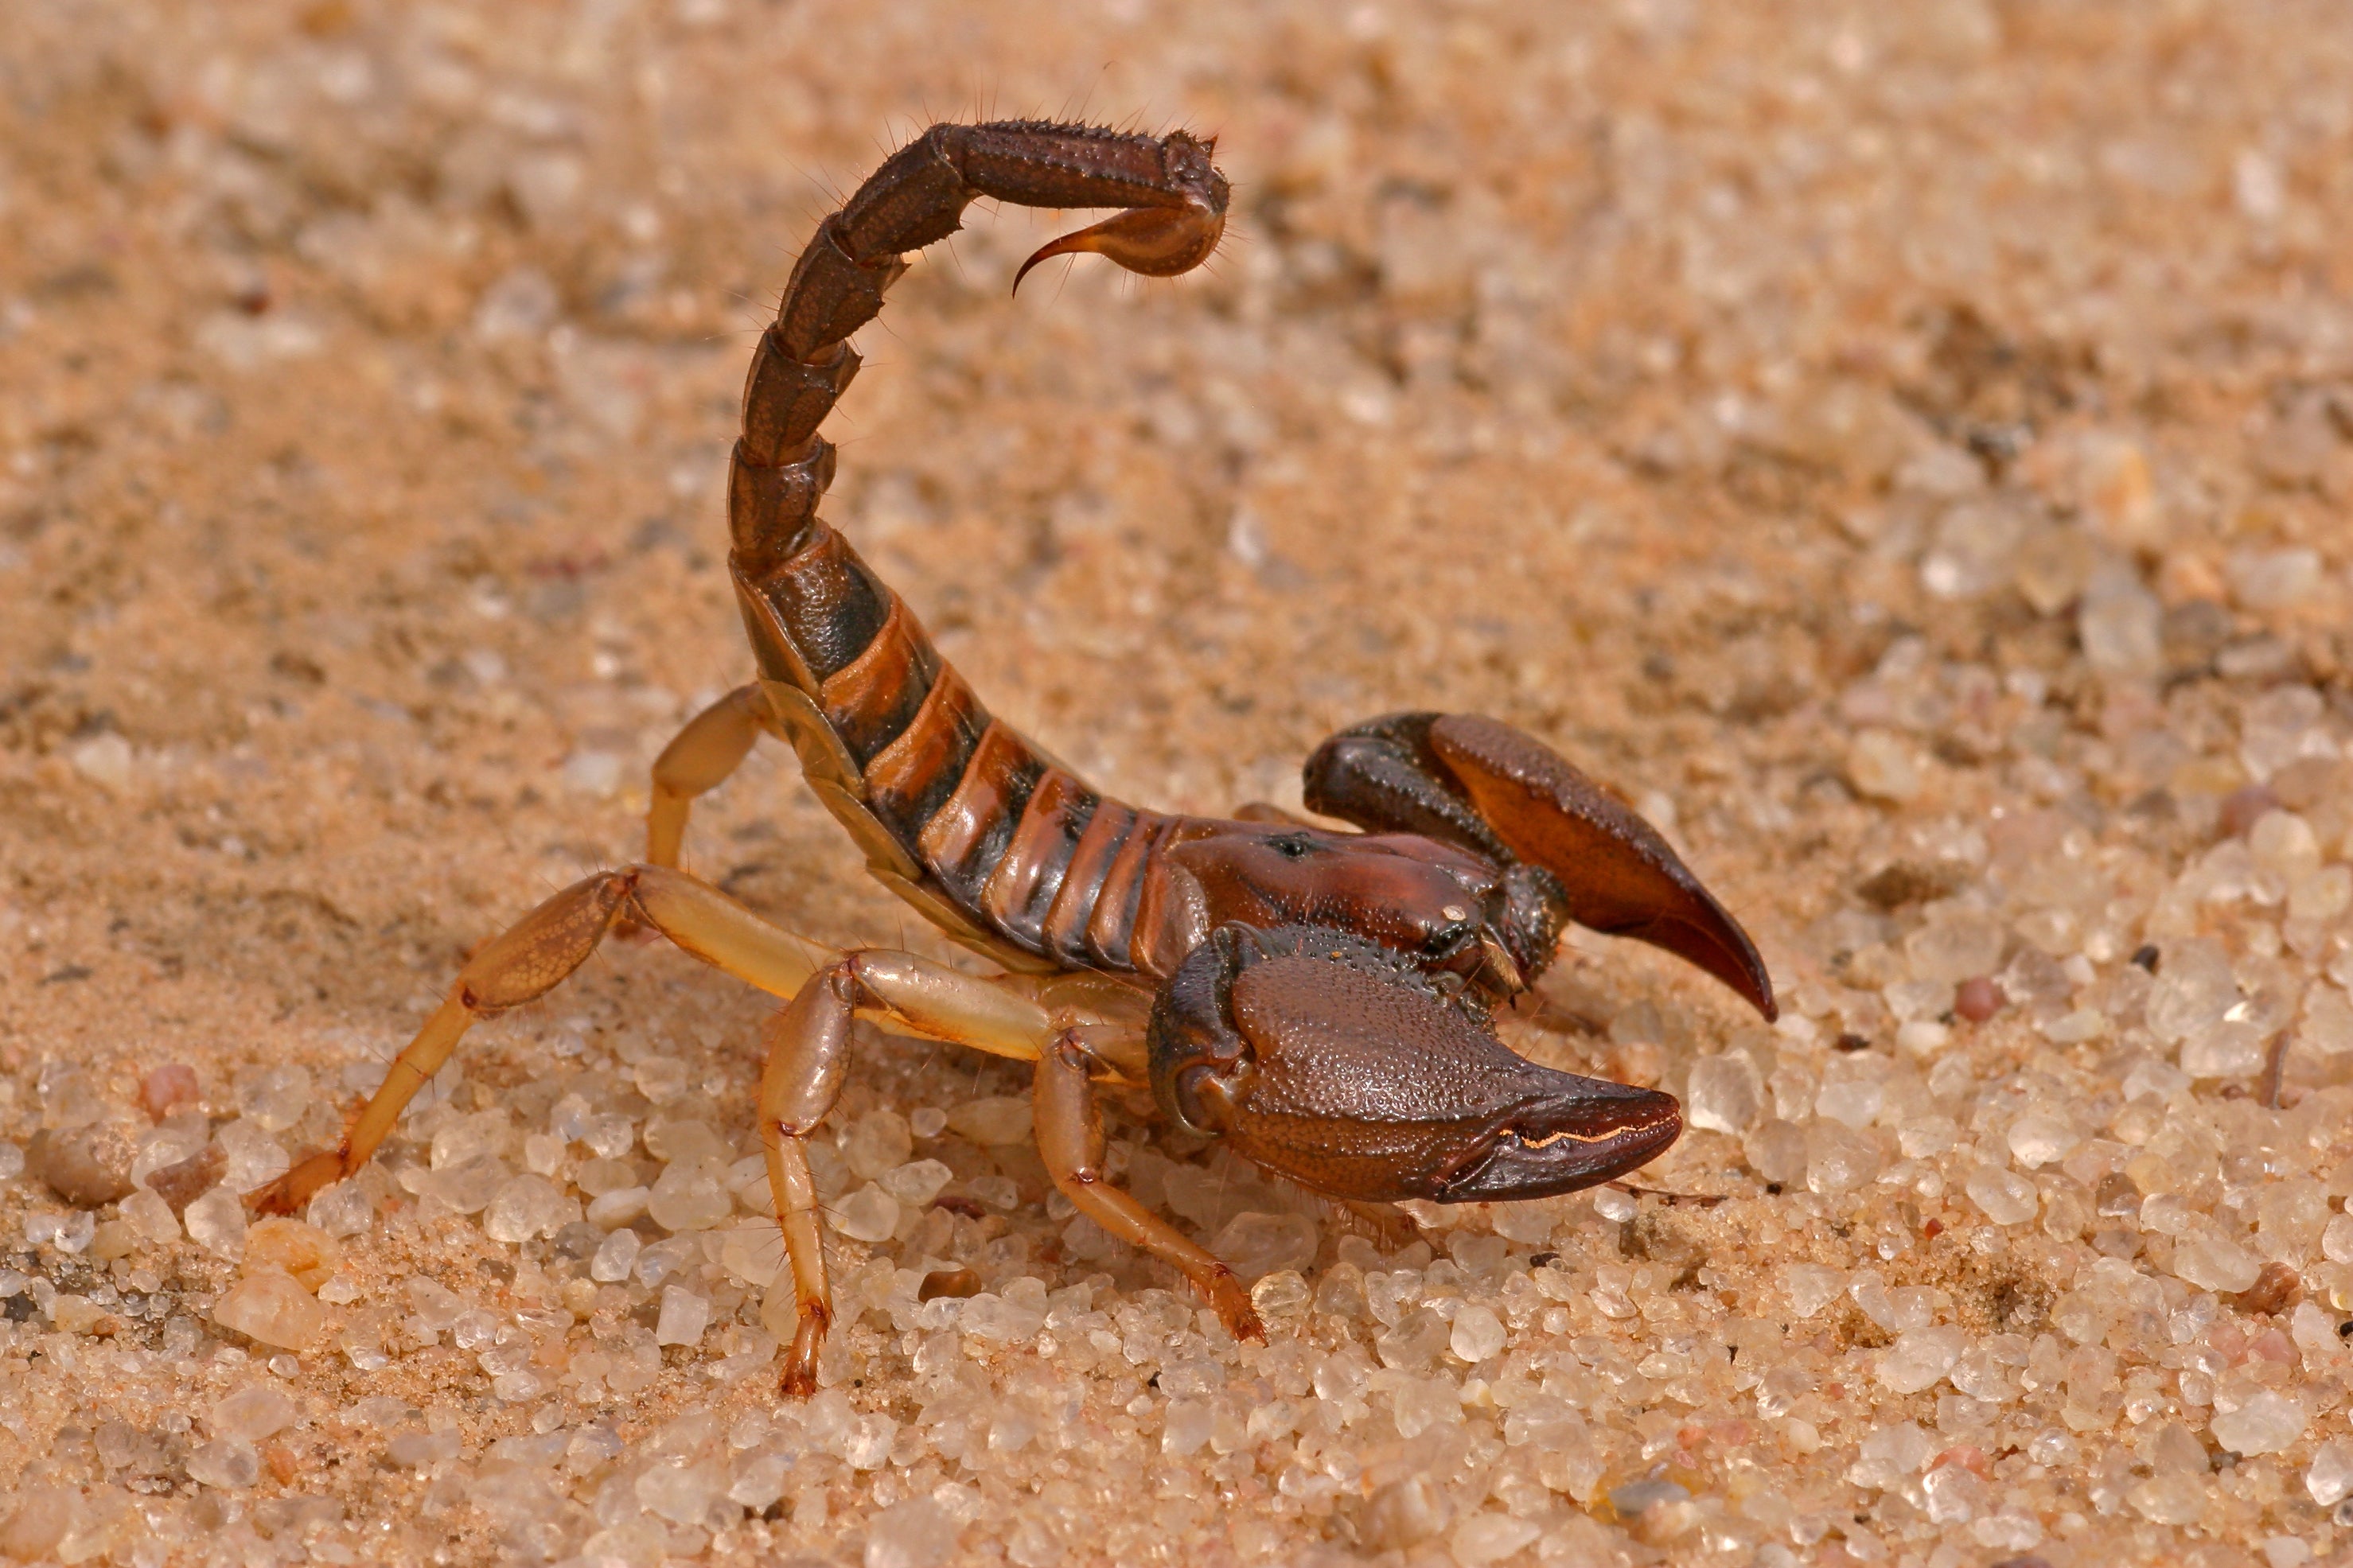 Scorpions bend their tails the way we might bend our fingers, but they can also twist them like a chain